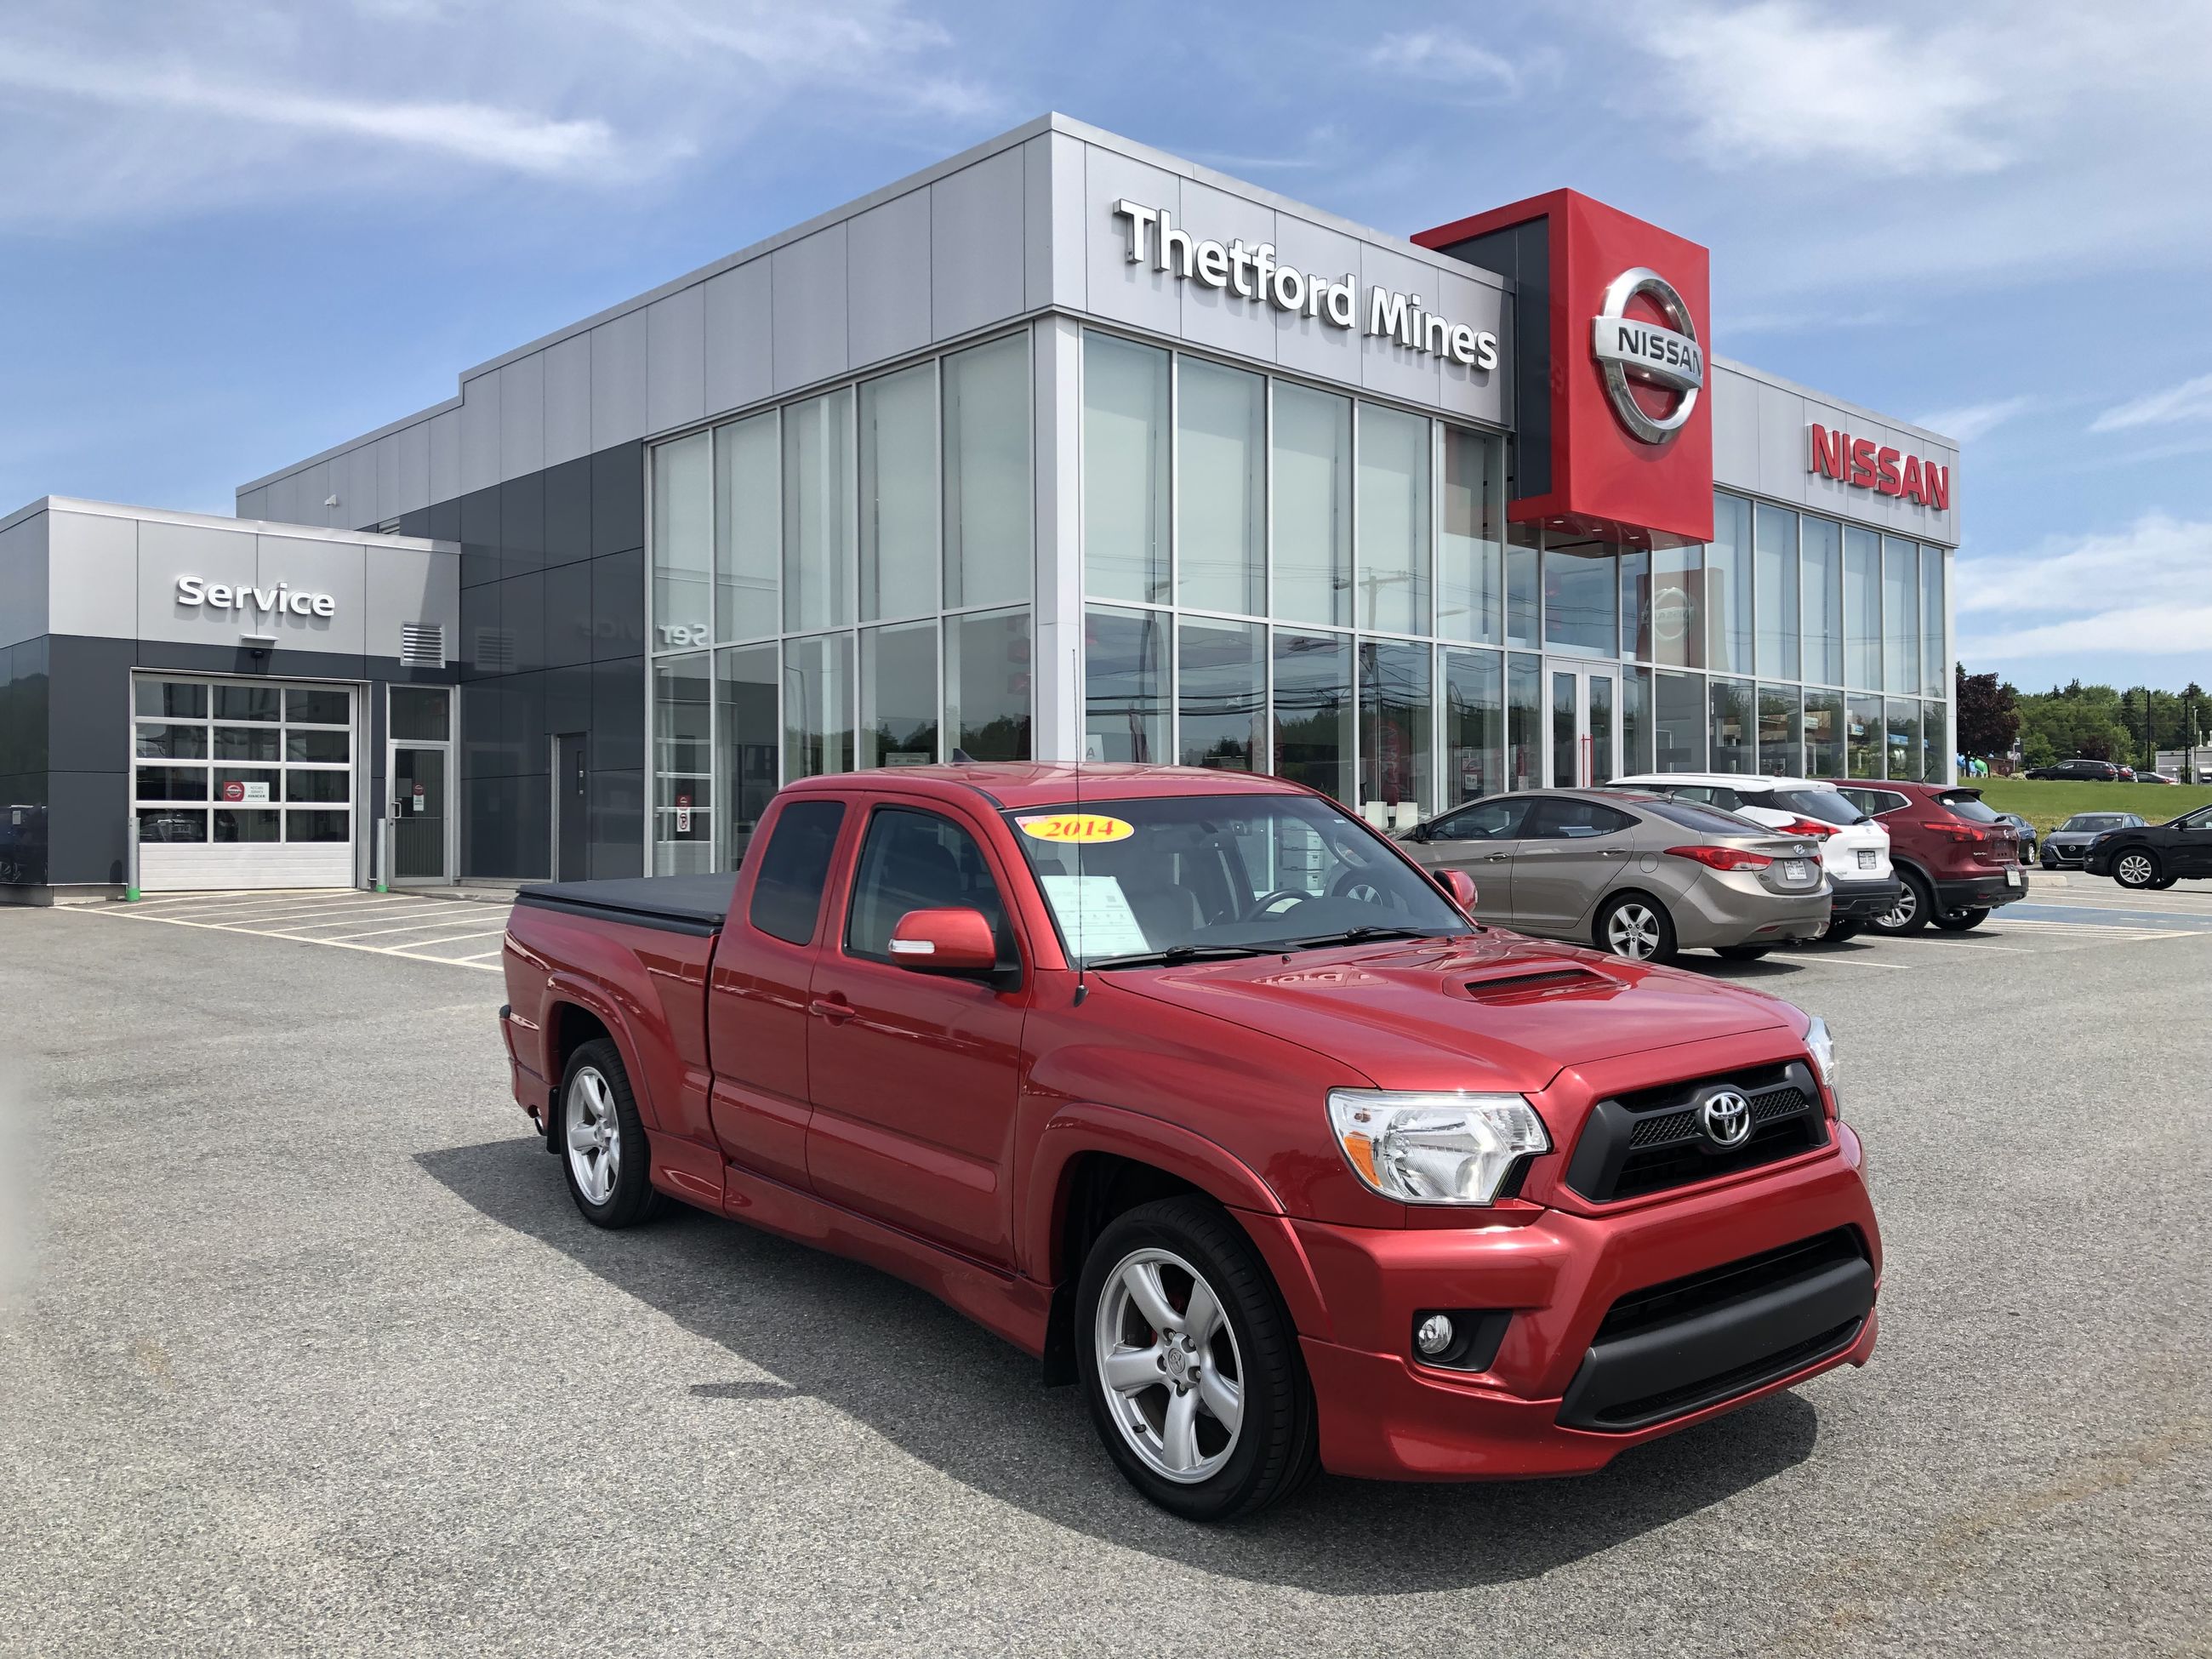 Used 14 Toyota Tacoma X Runner 4 0l Manuelle 0 Volvo Trois Rivieres